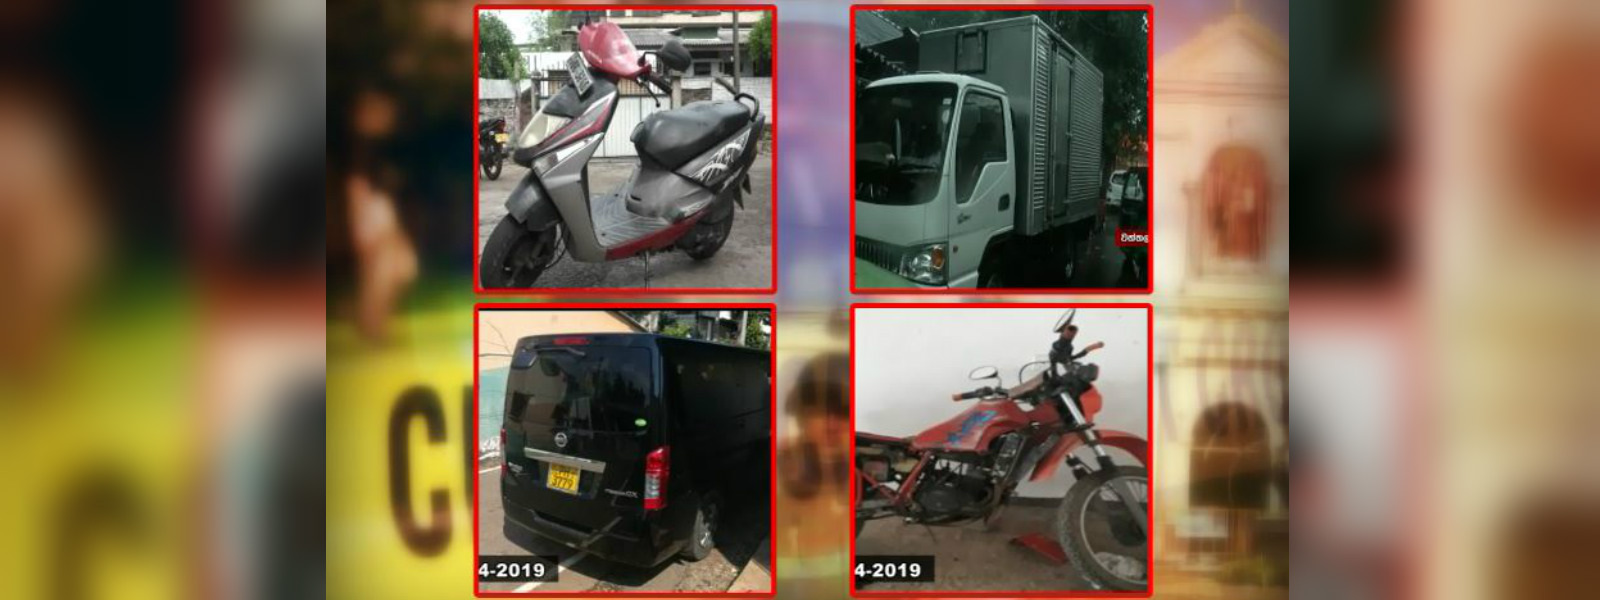 Easter bombings: 4 wanted vehicles found